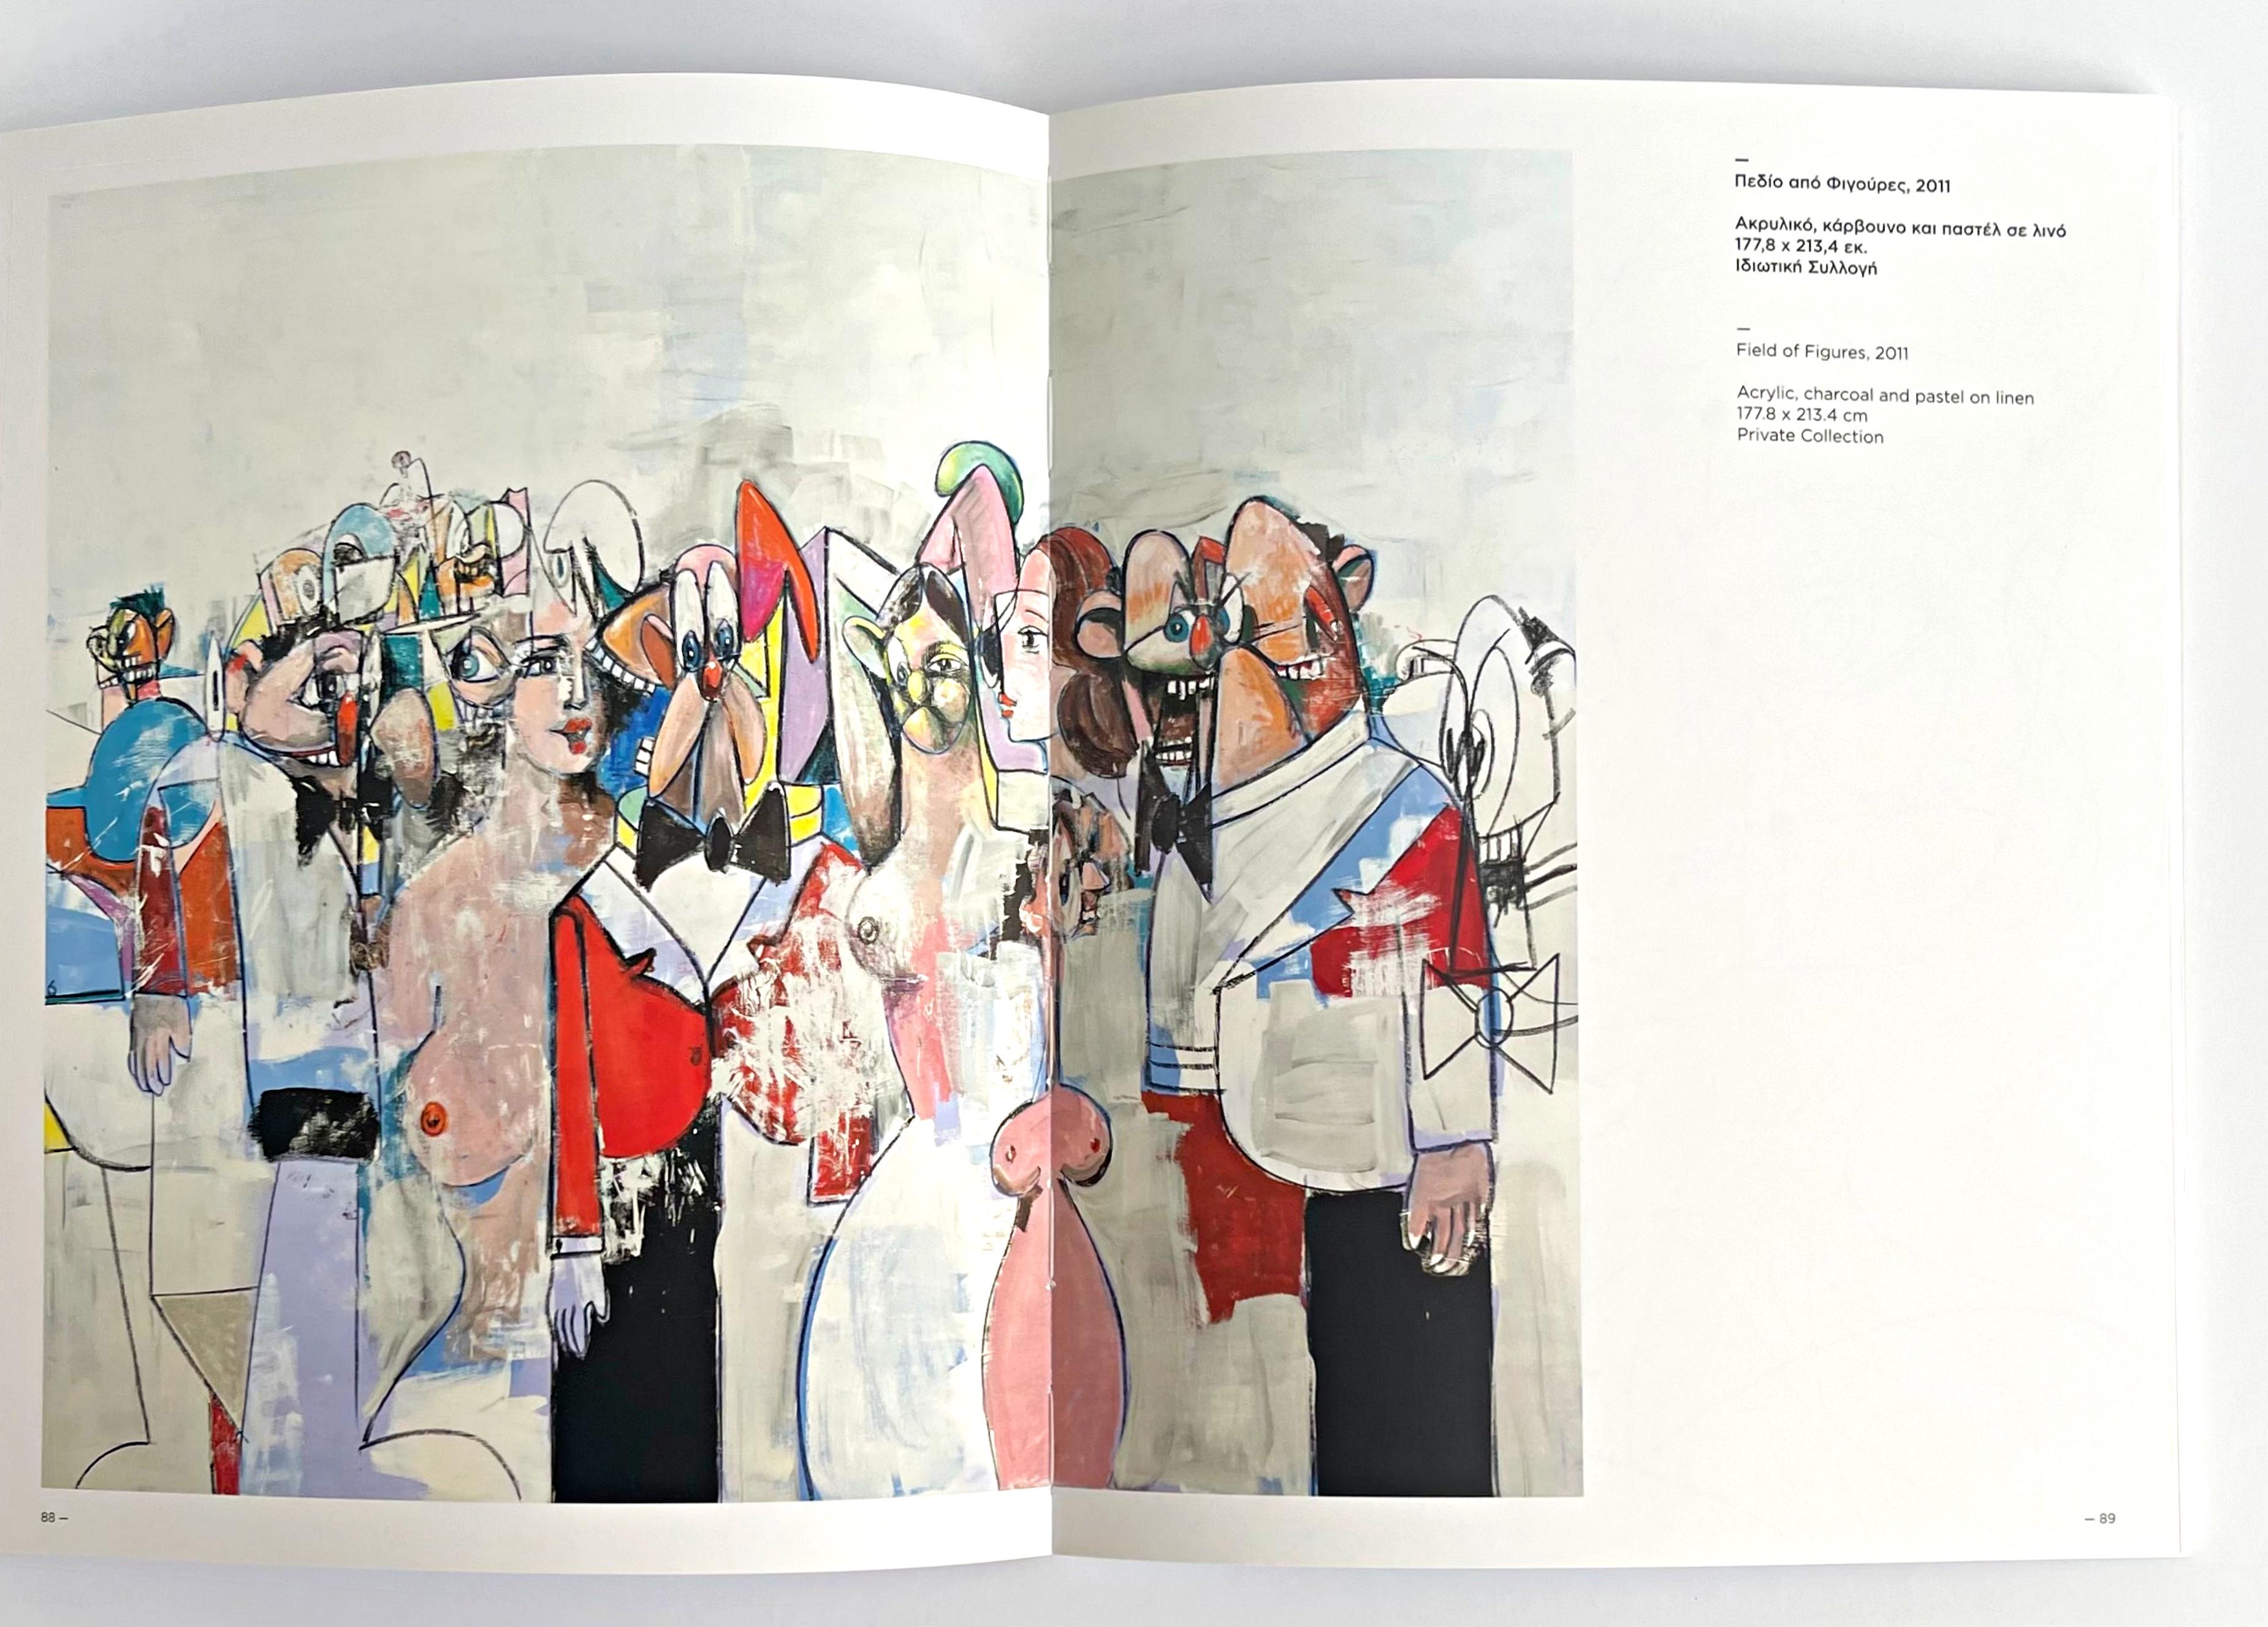 Limited Edition monograph with slipcase: George Condo at Cycladic (hand signed) For Sale 11